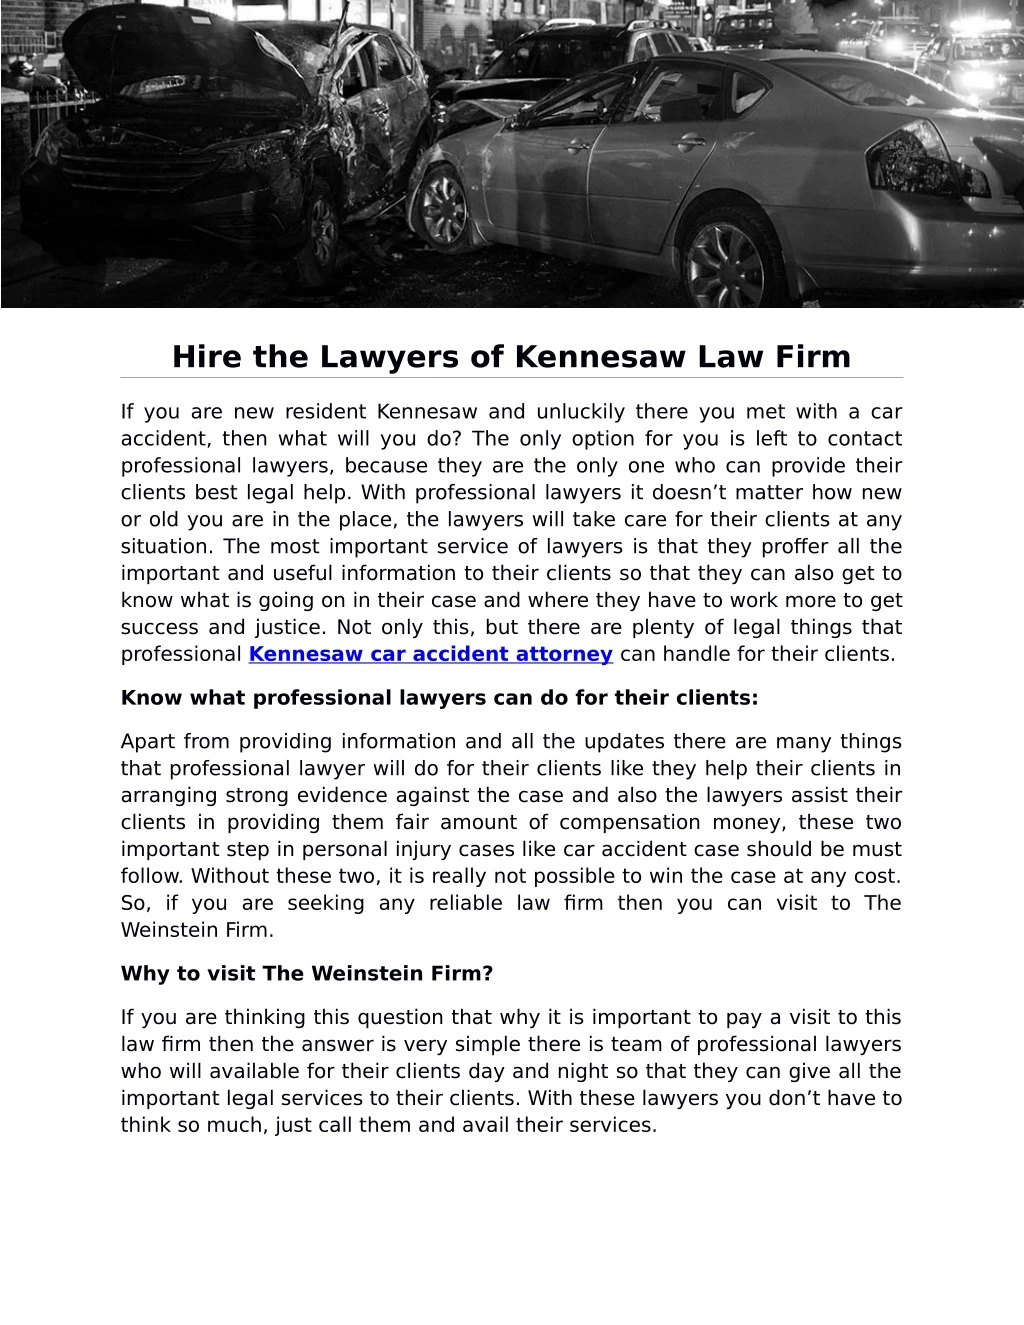 hire the lawyers of kennesaw law firm